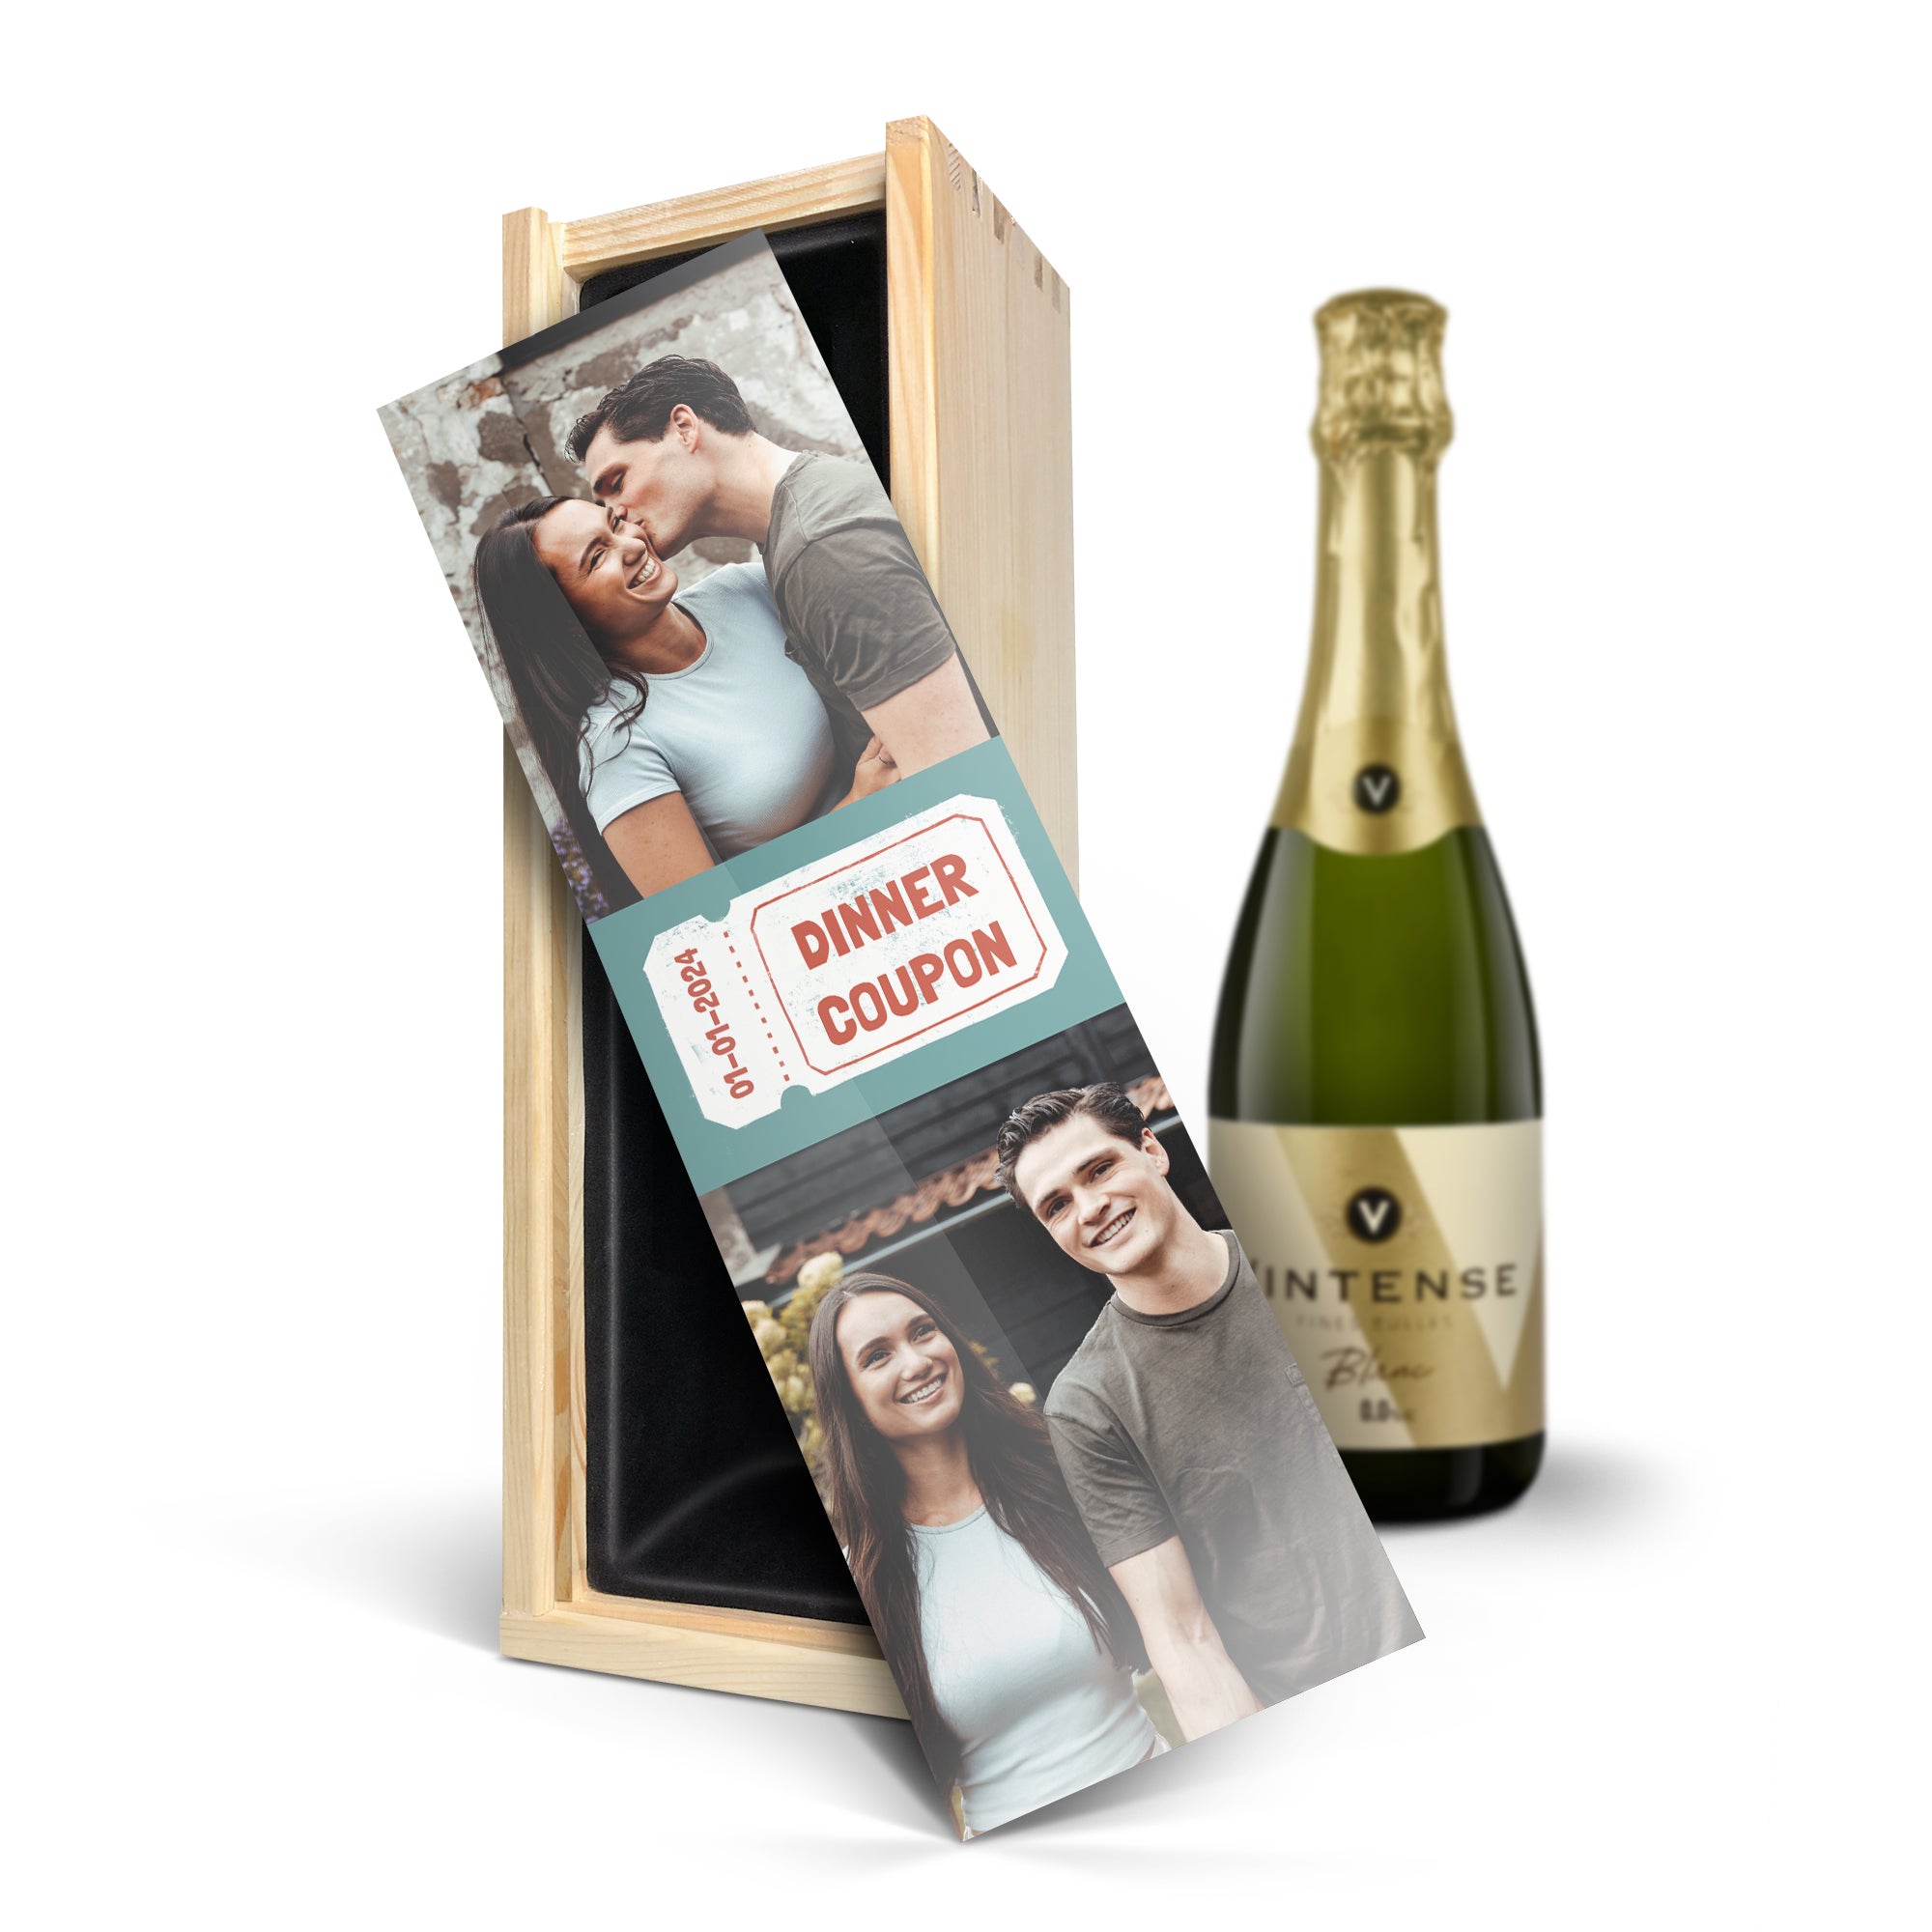 Wine in personalised case - Vintense Blanc alcohol-free